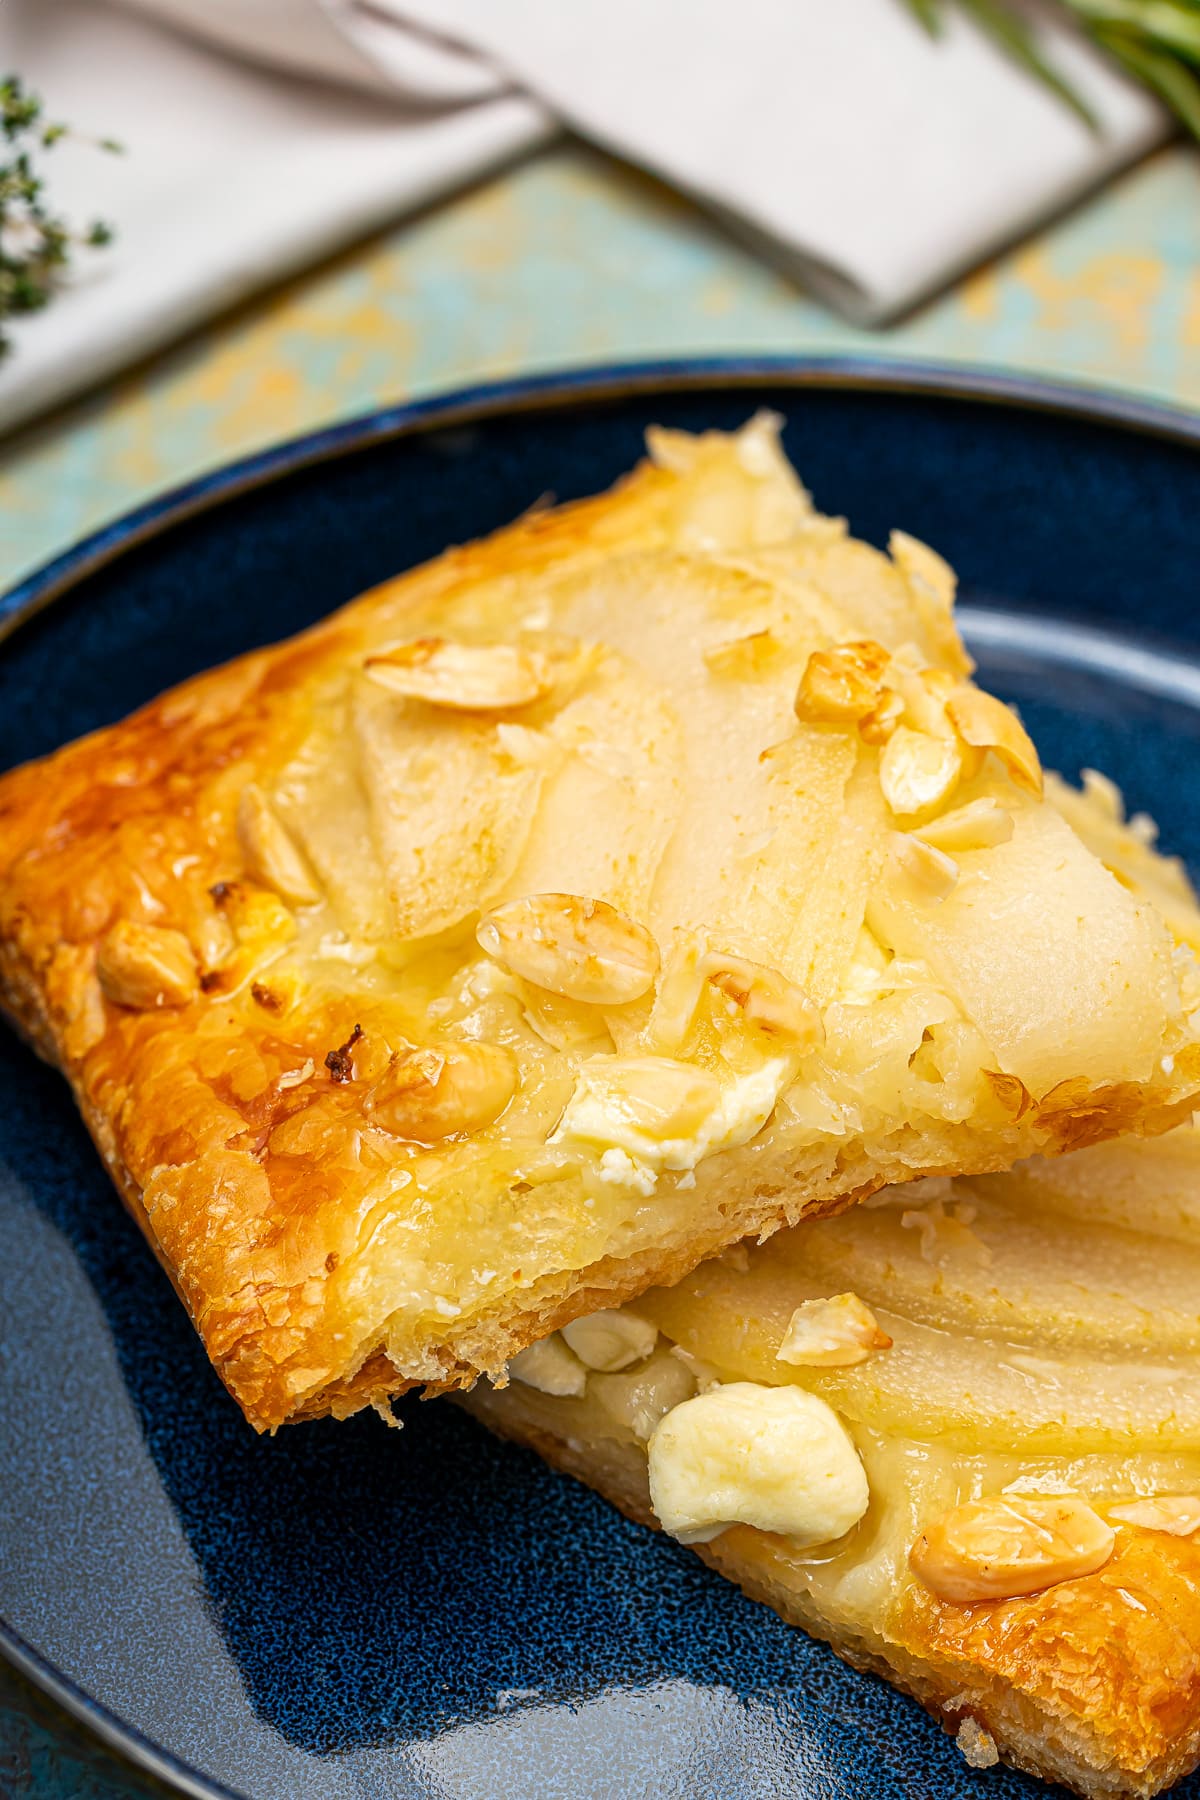 A single slice of pear and feta tart on a blue plate, showcasing the flaky pastry layers and toppings.